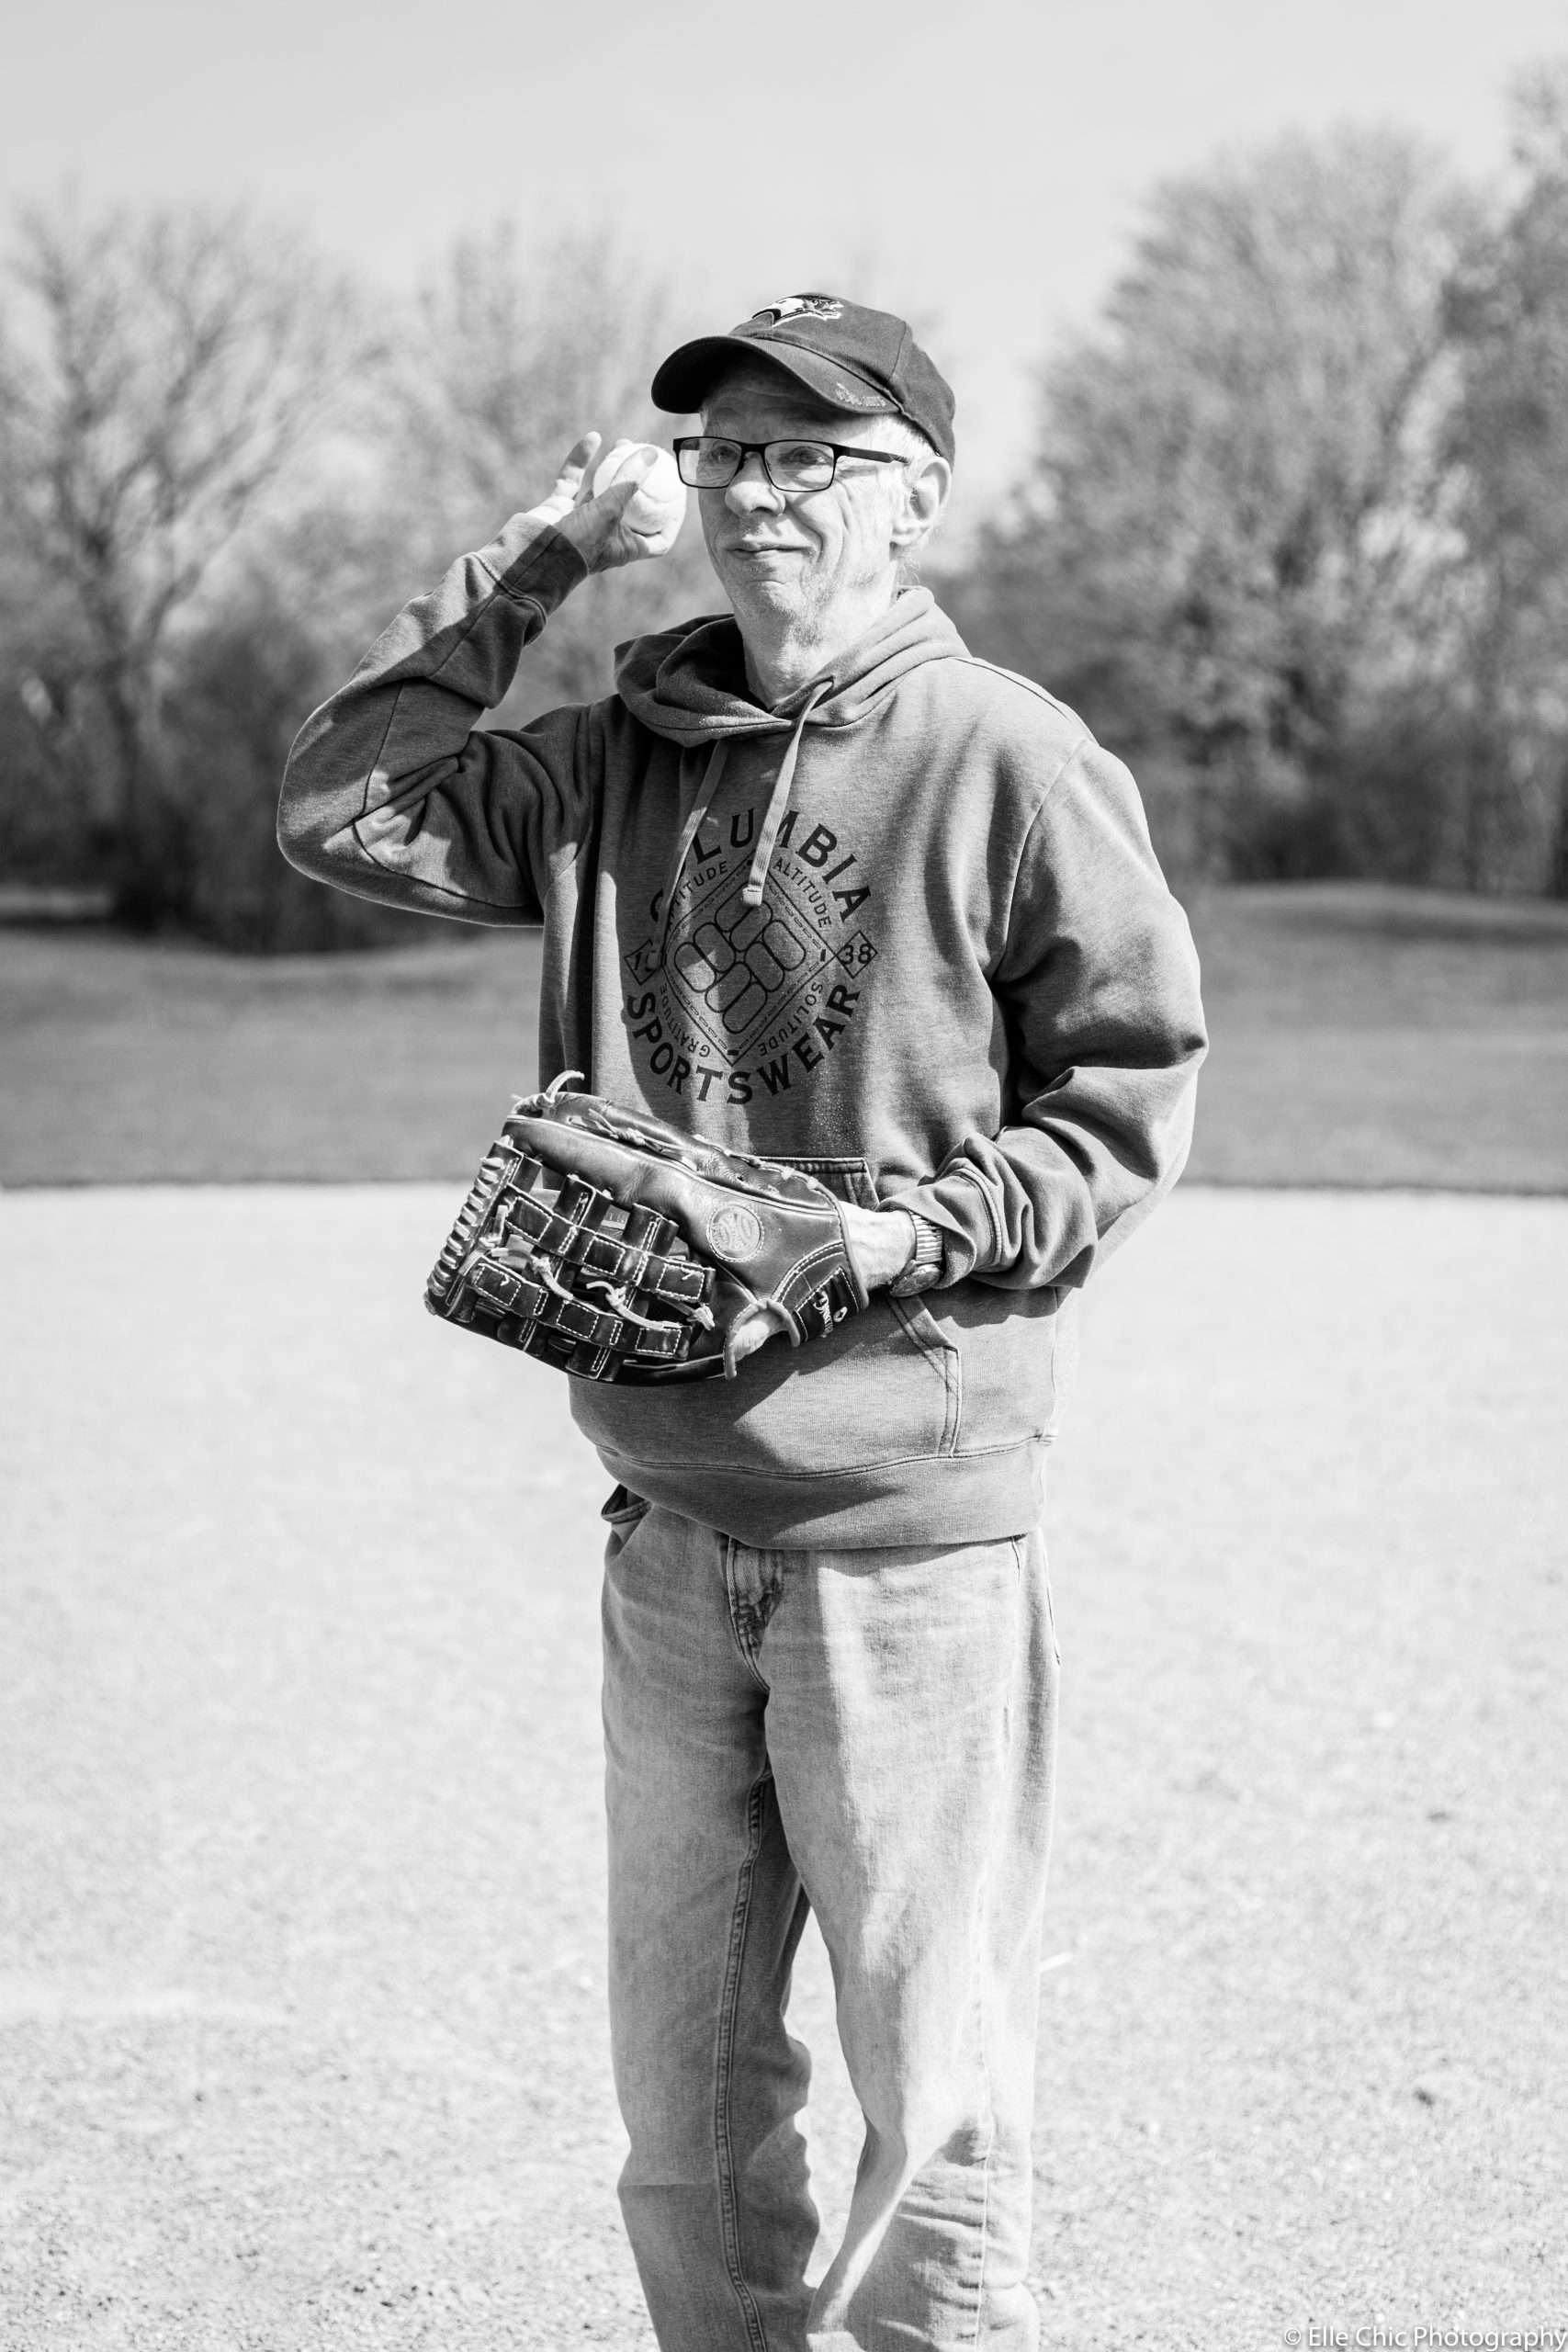 we've got this, photo series, one year later, covid-19, community living guelph wellington, elle chic photography, guelph ontario, disability, frontline heroes, mike, baseball